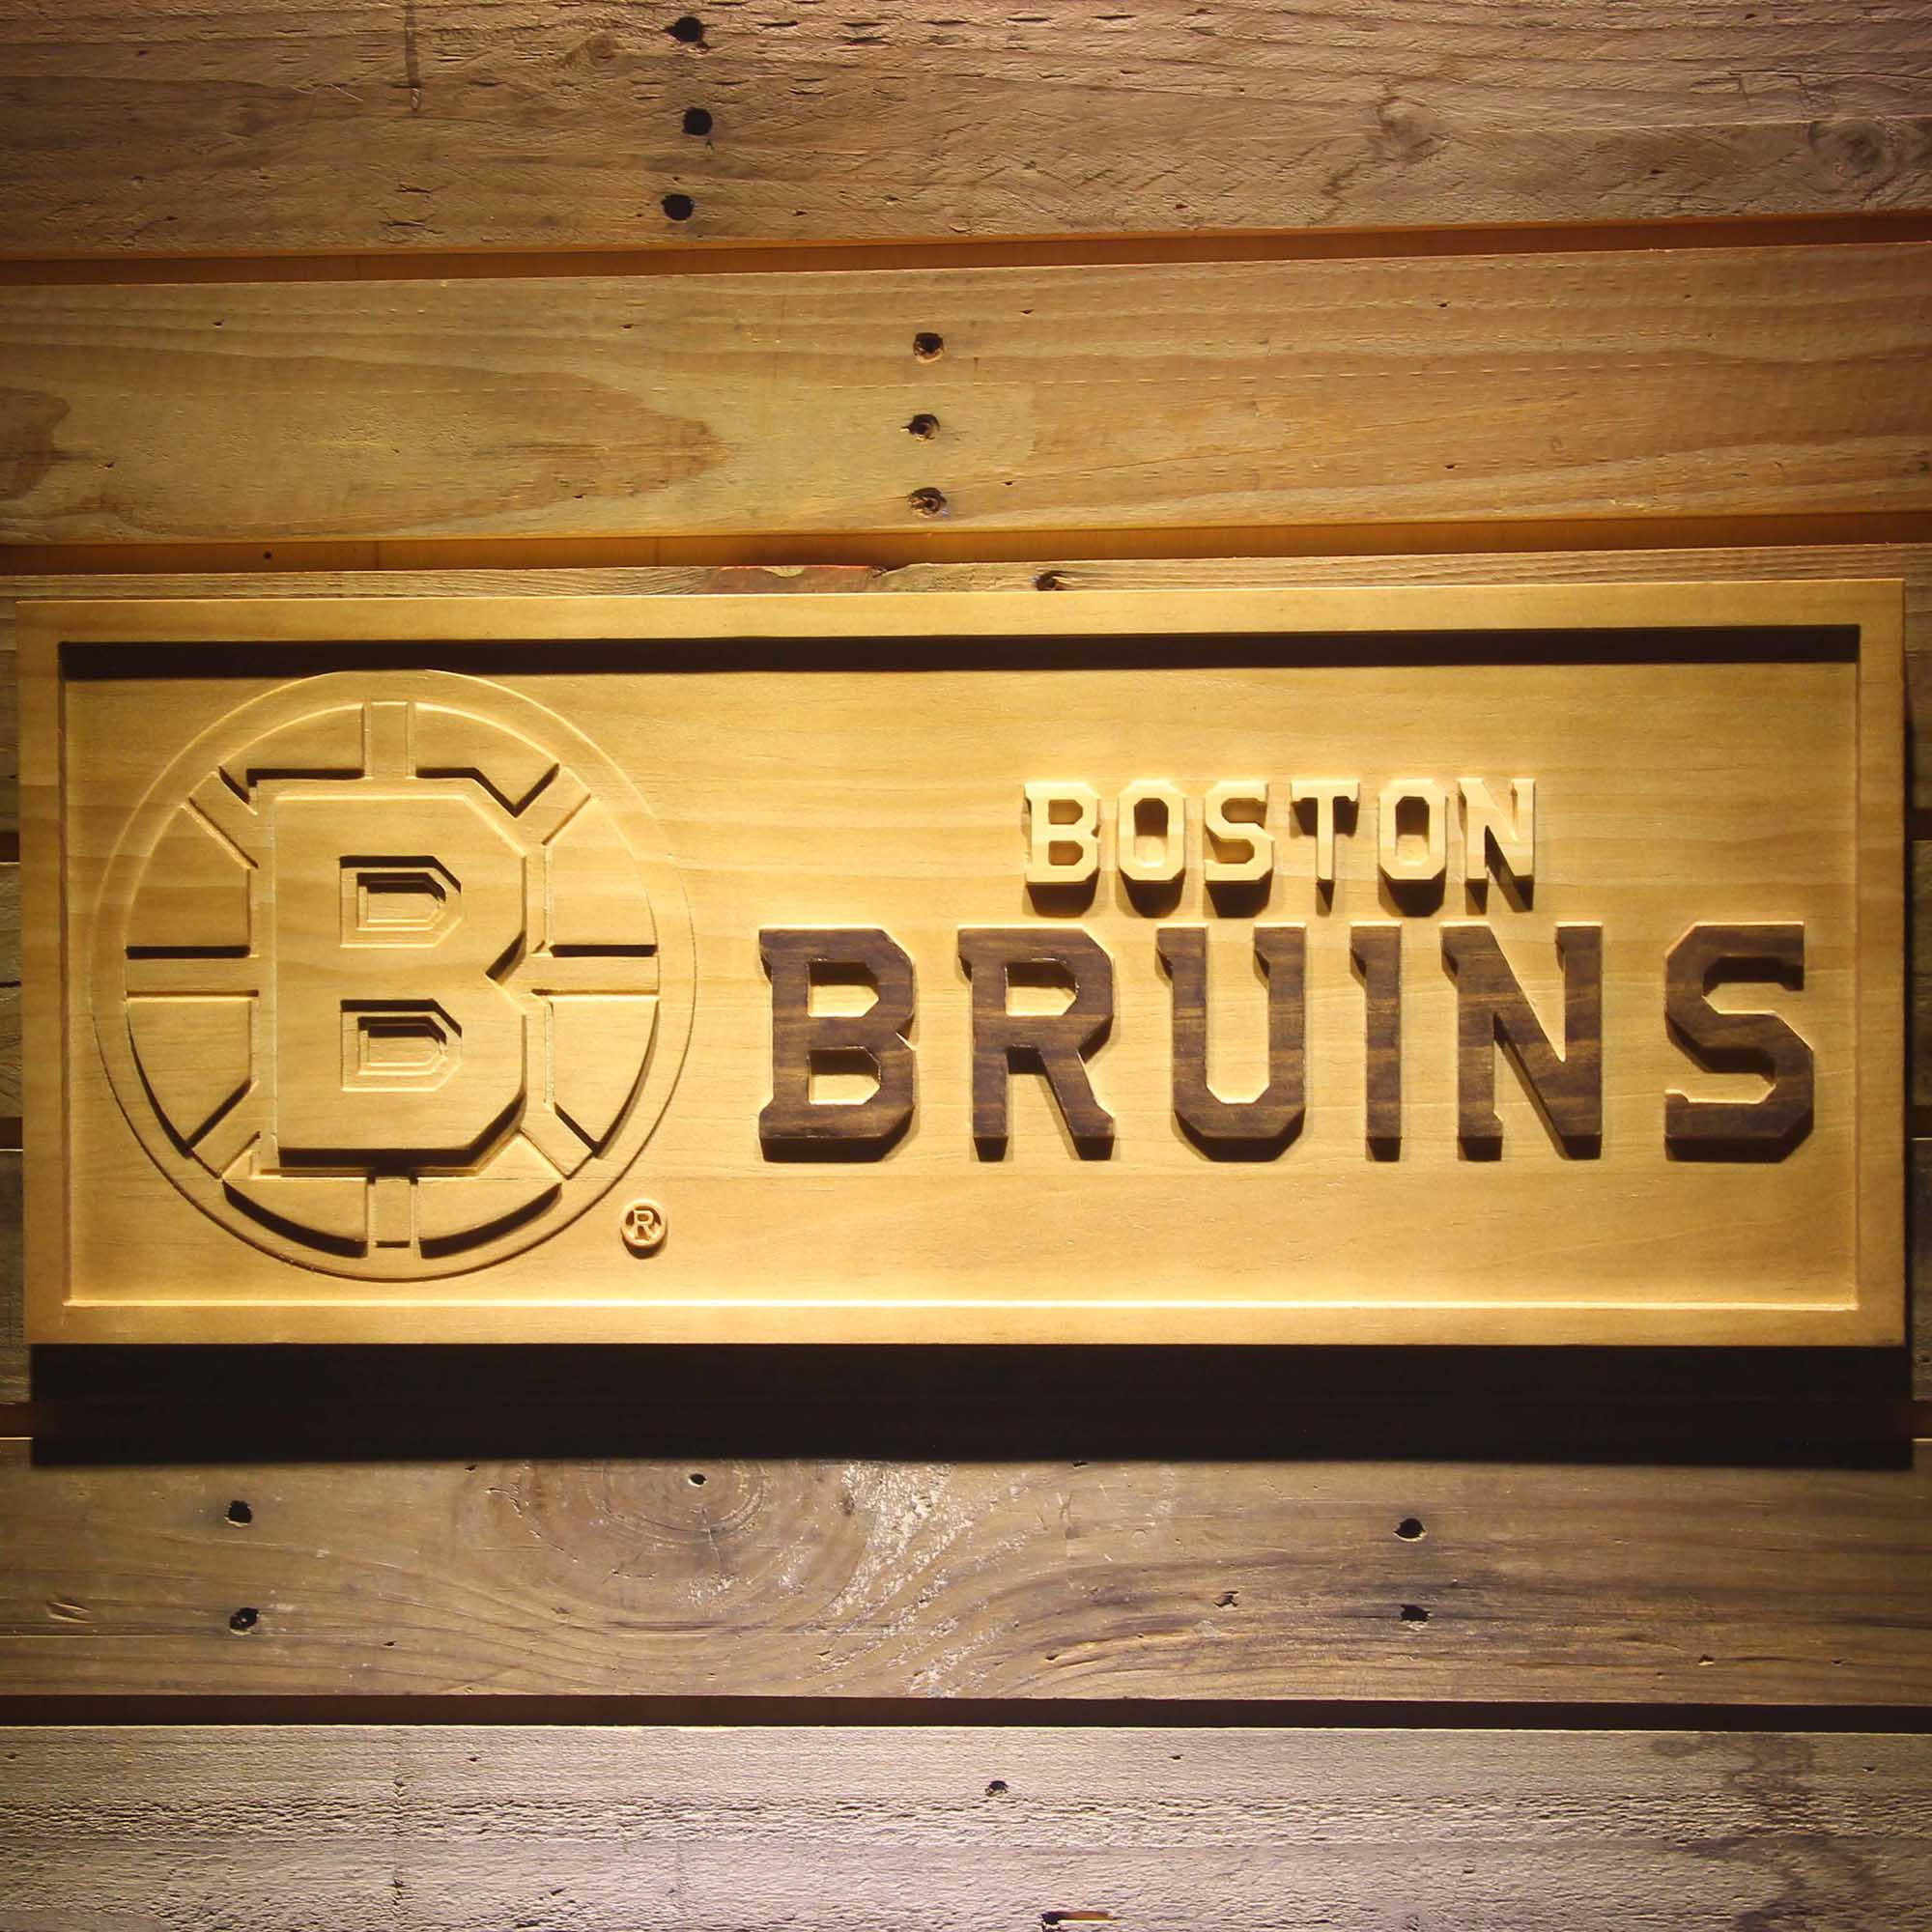 Boston Bruins 3D Solid Wooden Craving Sign